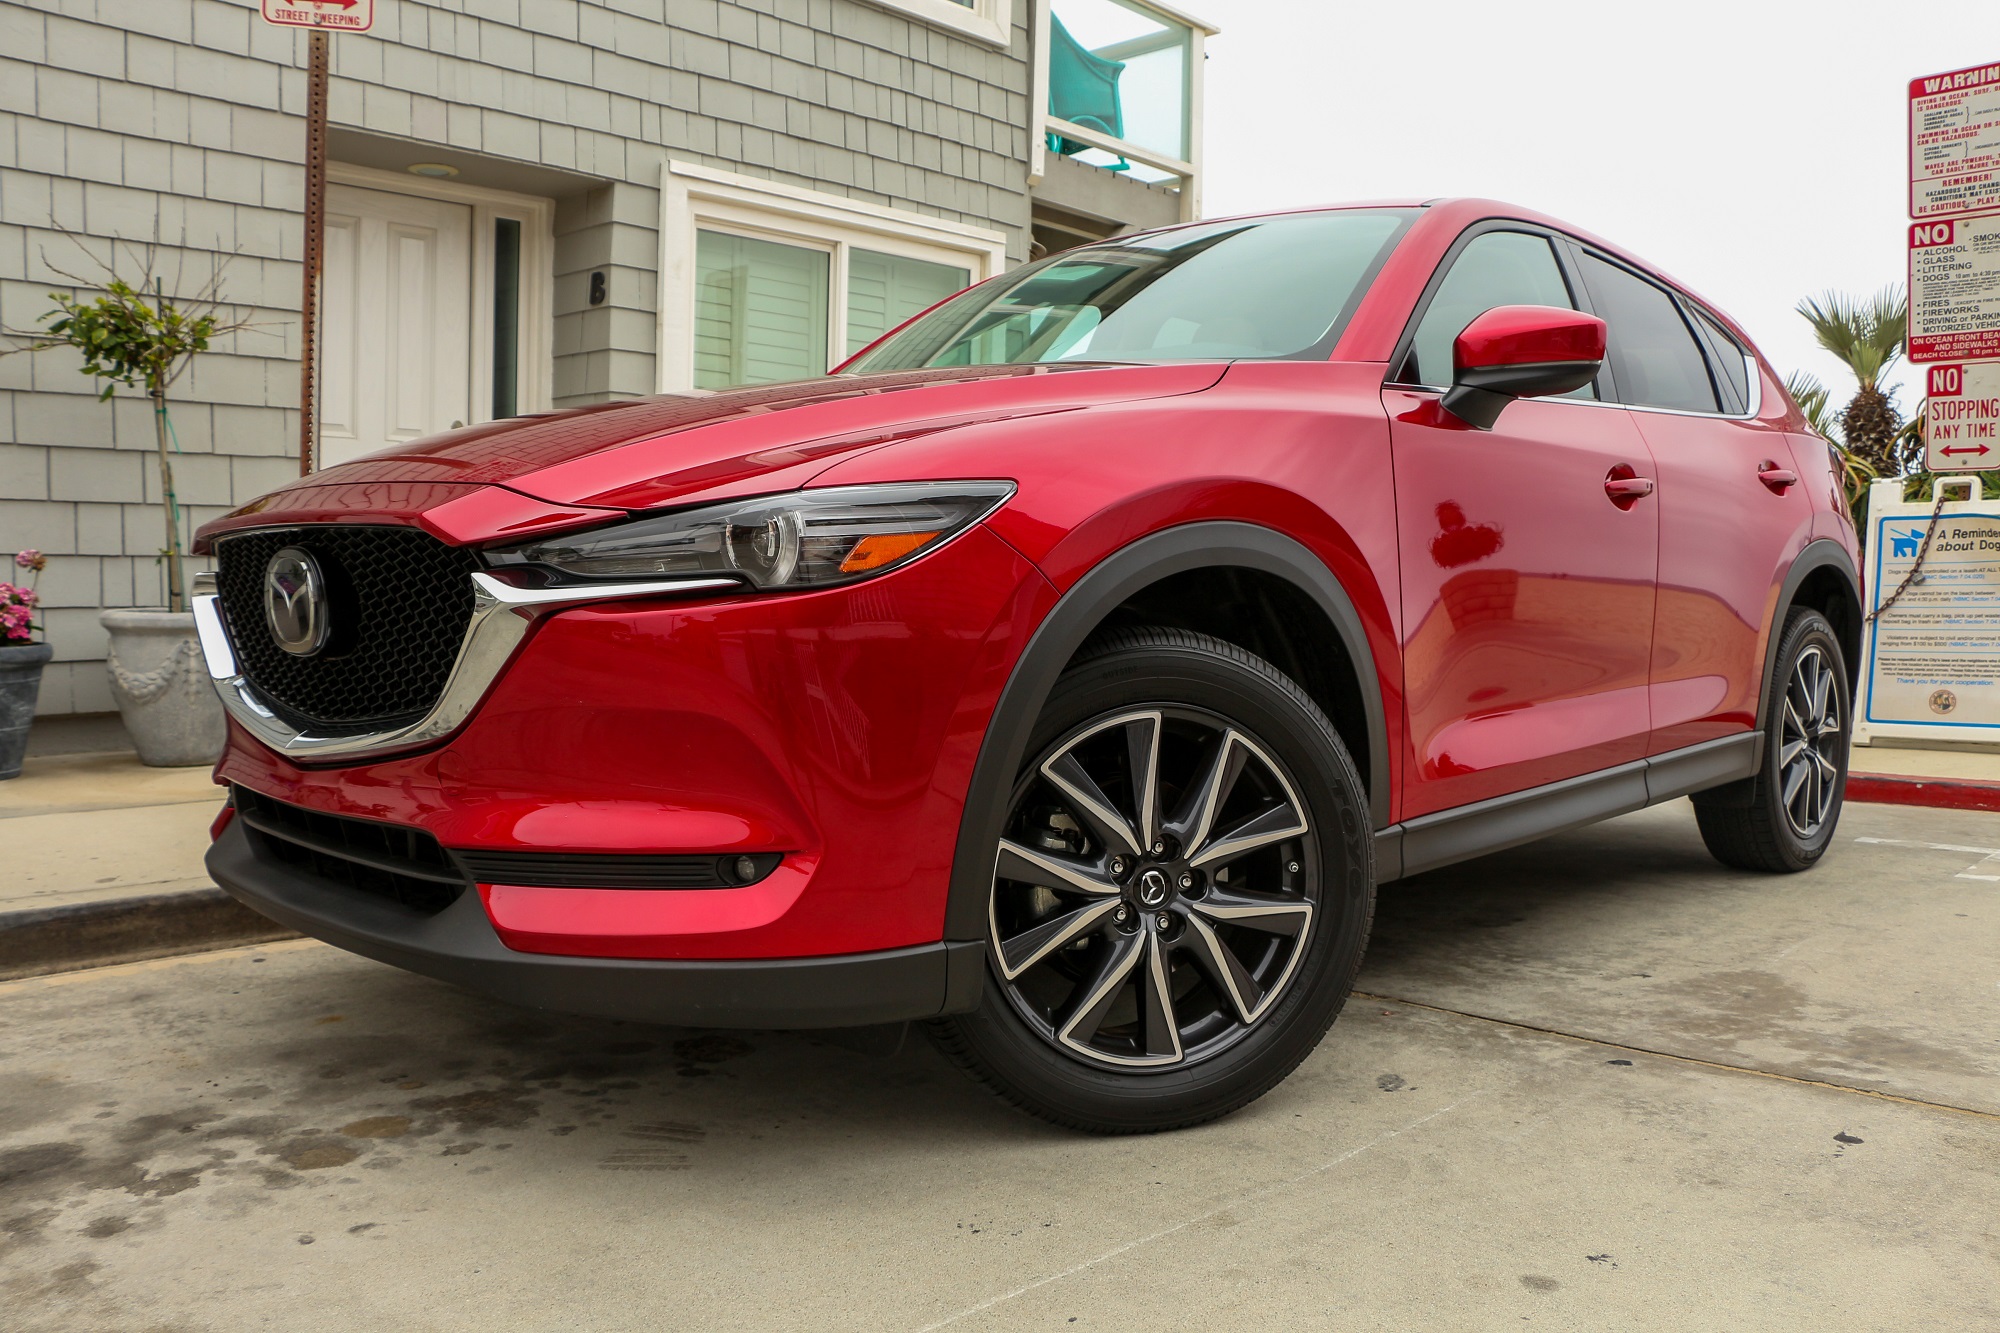 2018 Mazda CX-5 Review: All the Luxury You Will Ever Need - 6SpeedOnline